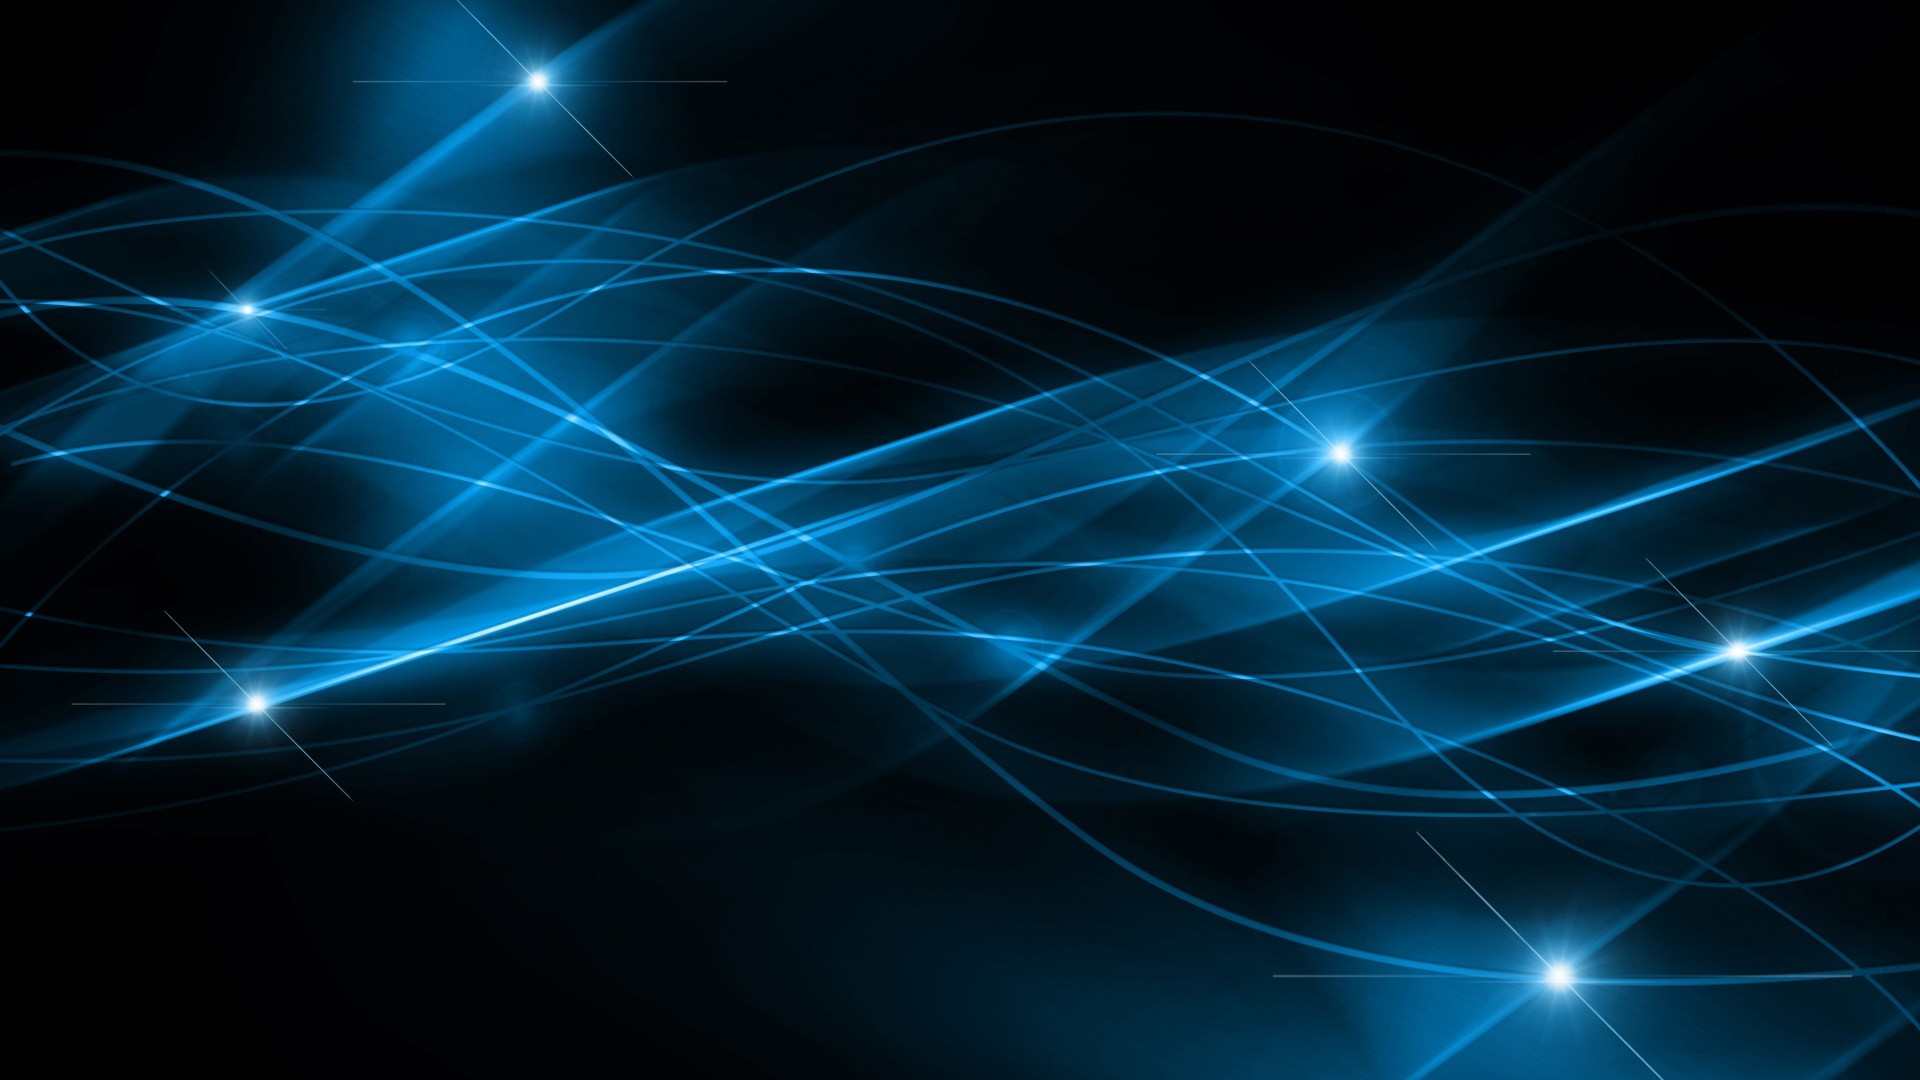 1920x1080 Blue and Black Abstract Wallpaper